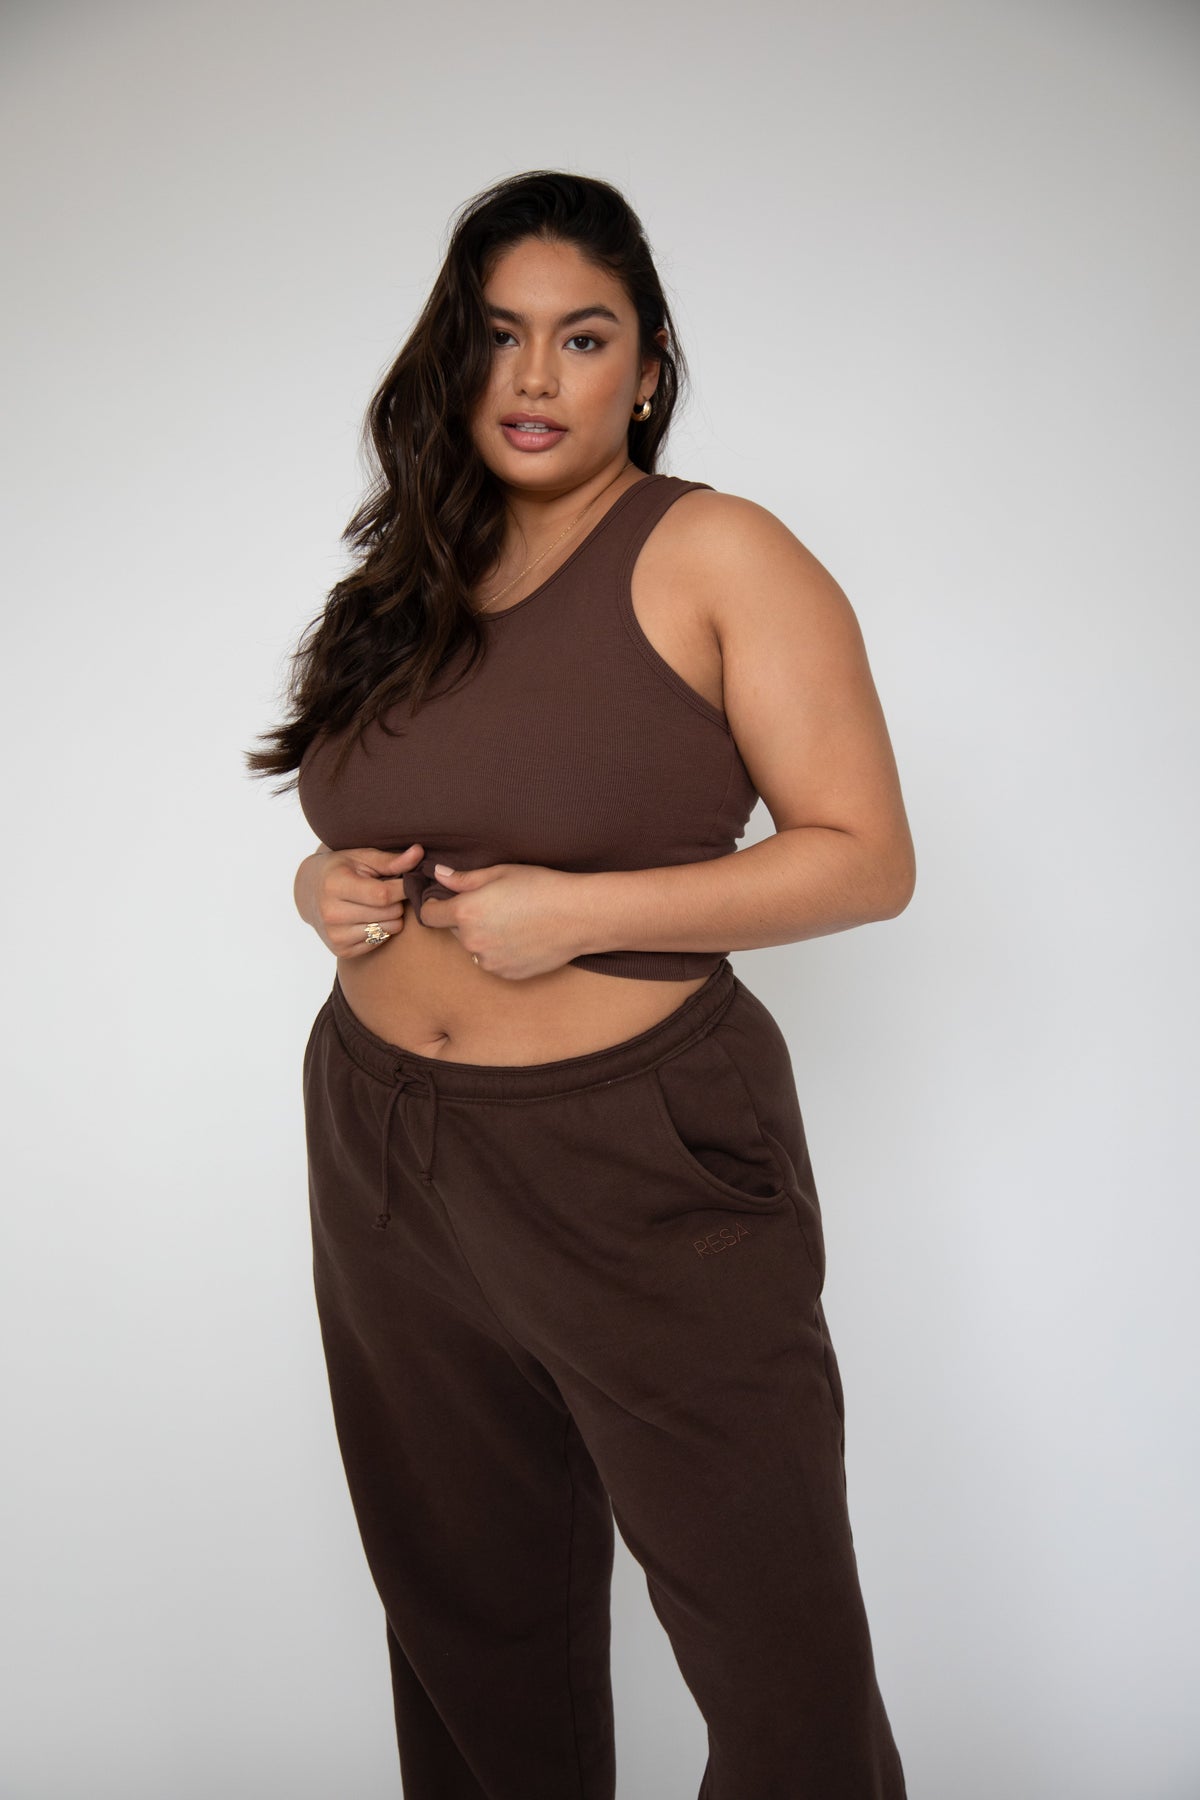 This is an image of OG Tank in Brown - RESA featuring a model wearing the dress